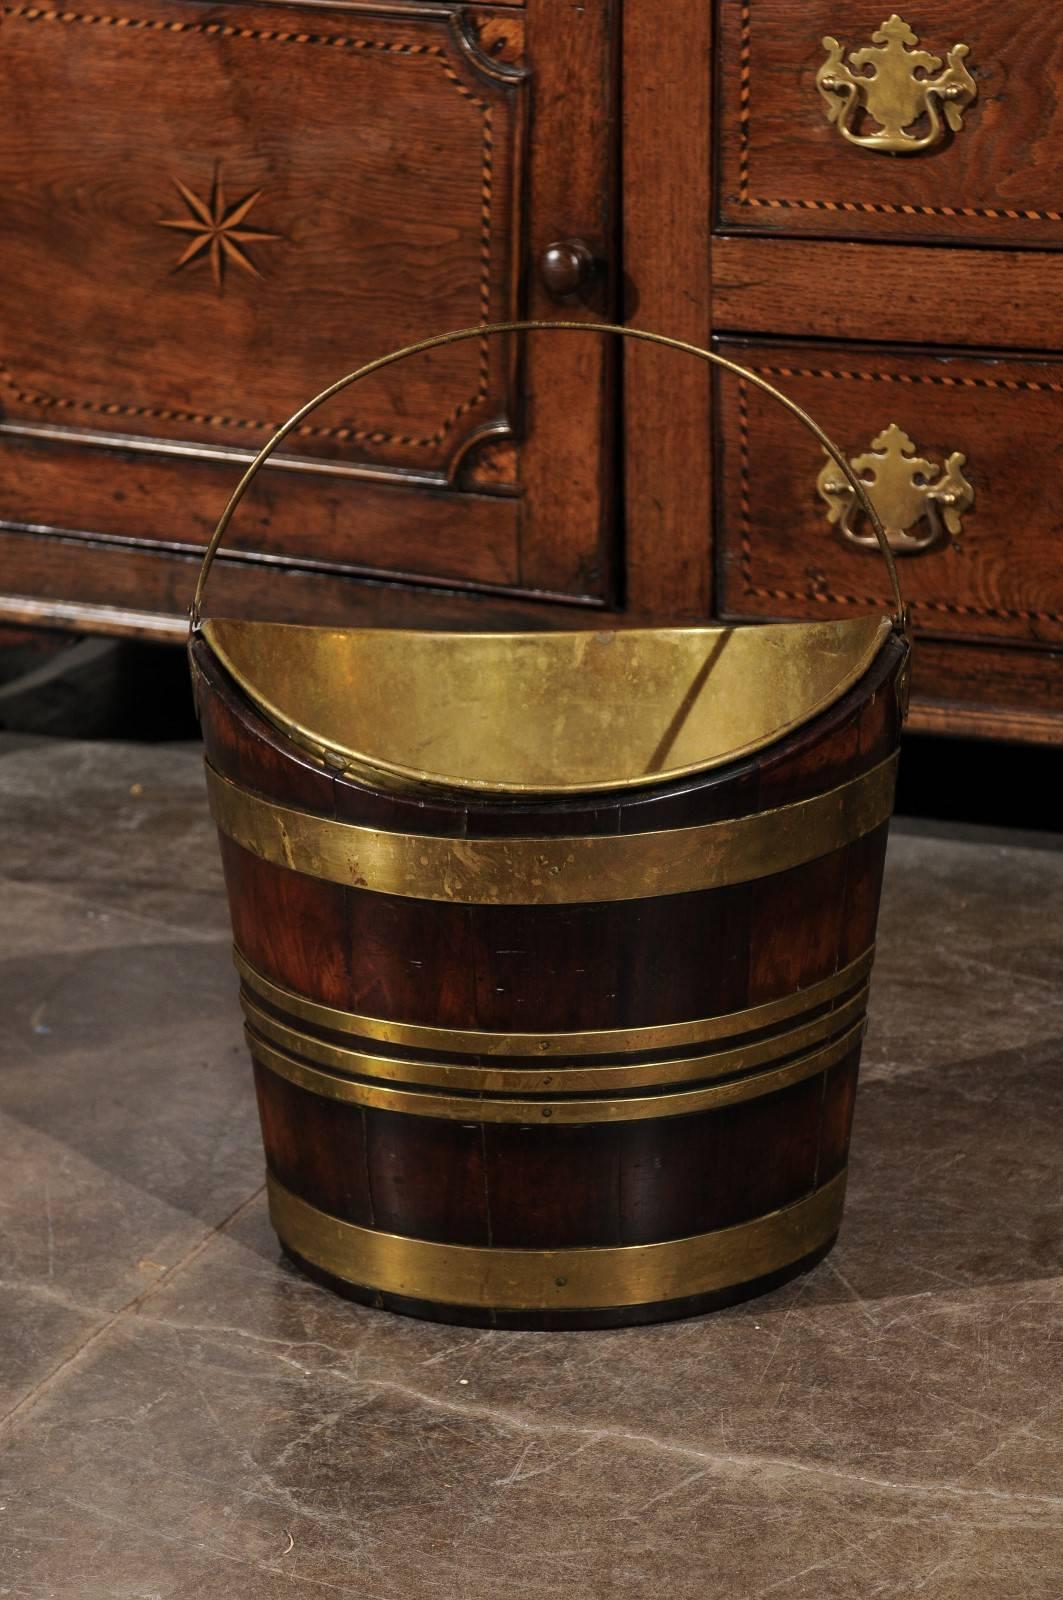 A 19th century English wooden peat bucket with brass lining. This mahogany peat bucket is secured by five brass bands, two wider ones at the top and the bottom and three narrow ones in the center. Peat buckets were common in England and Ireland